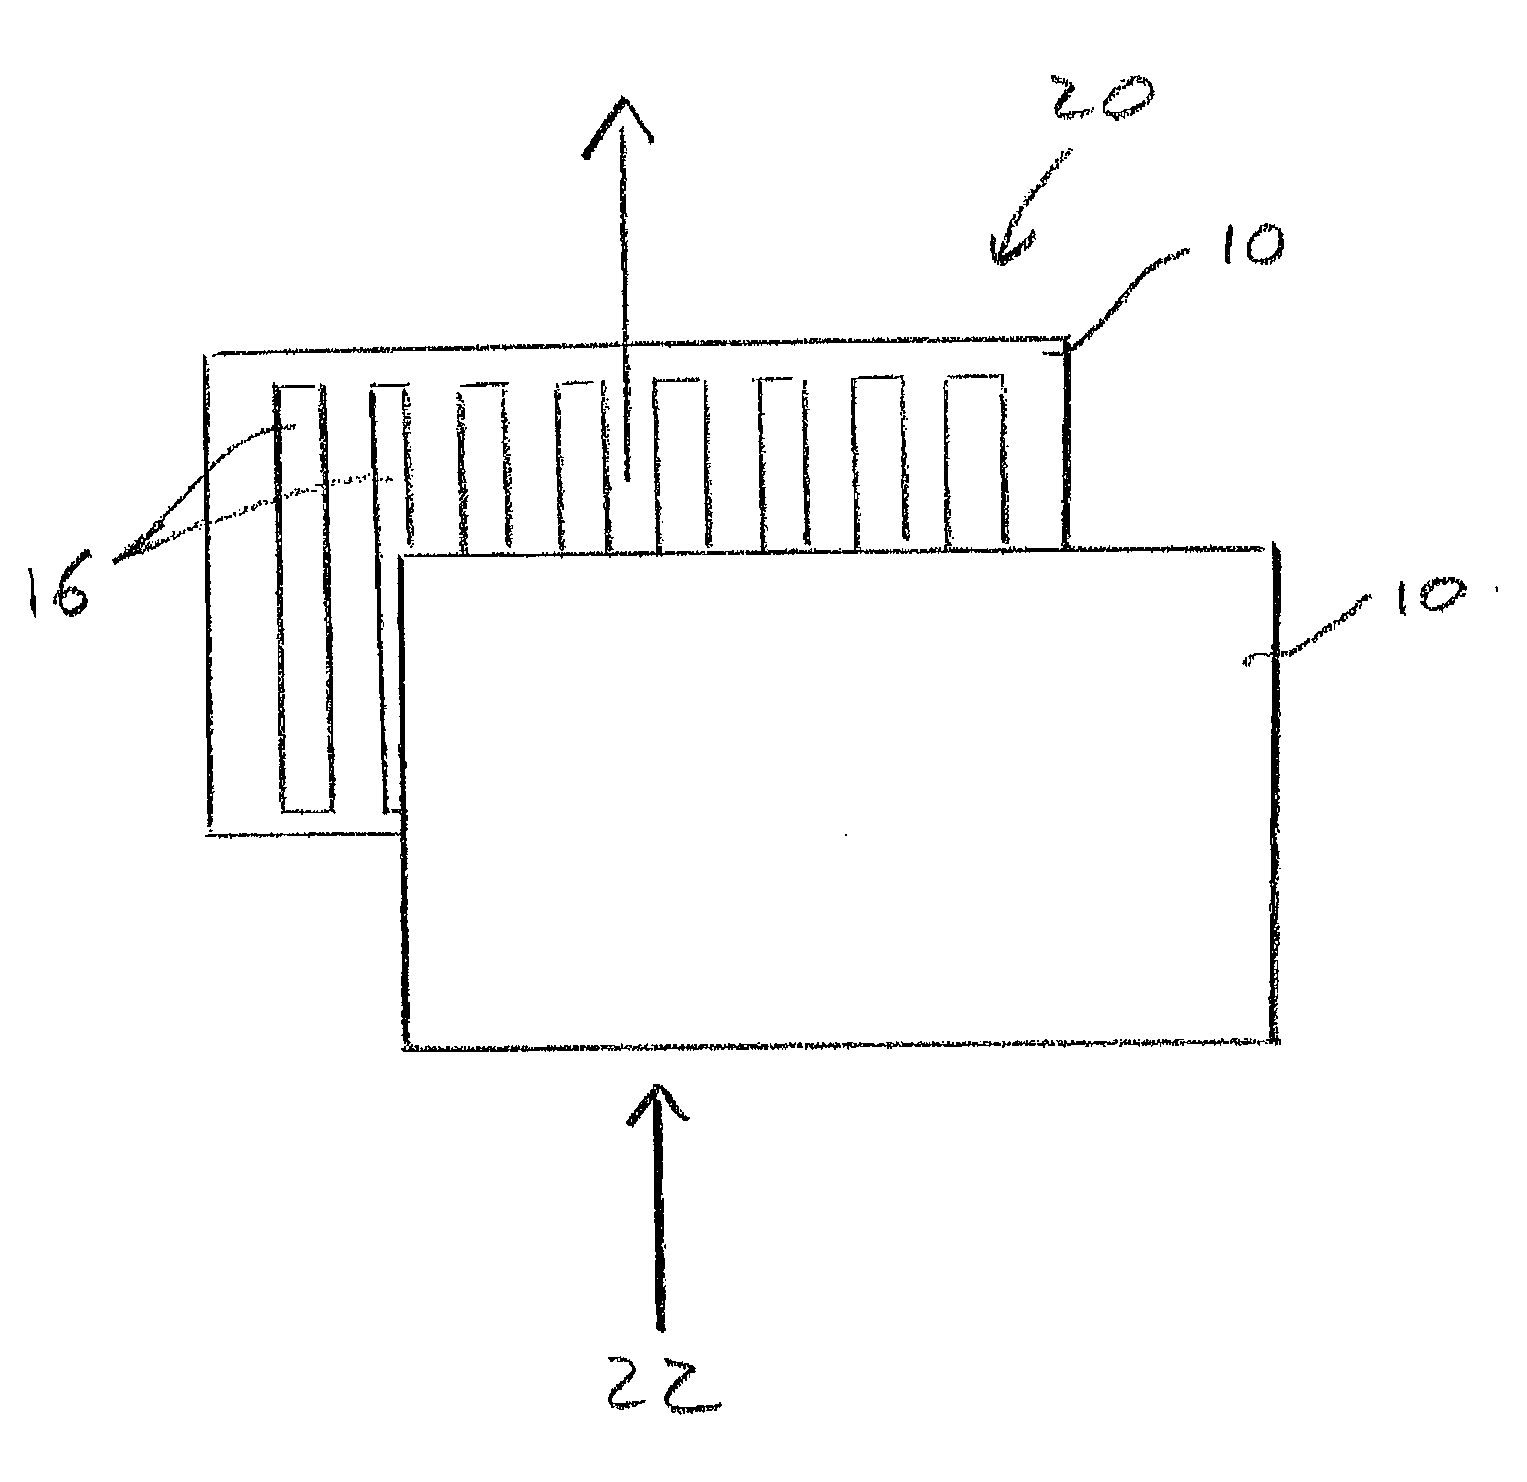 Diamond electrodes for electrochemical devices